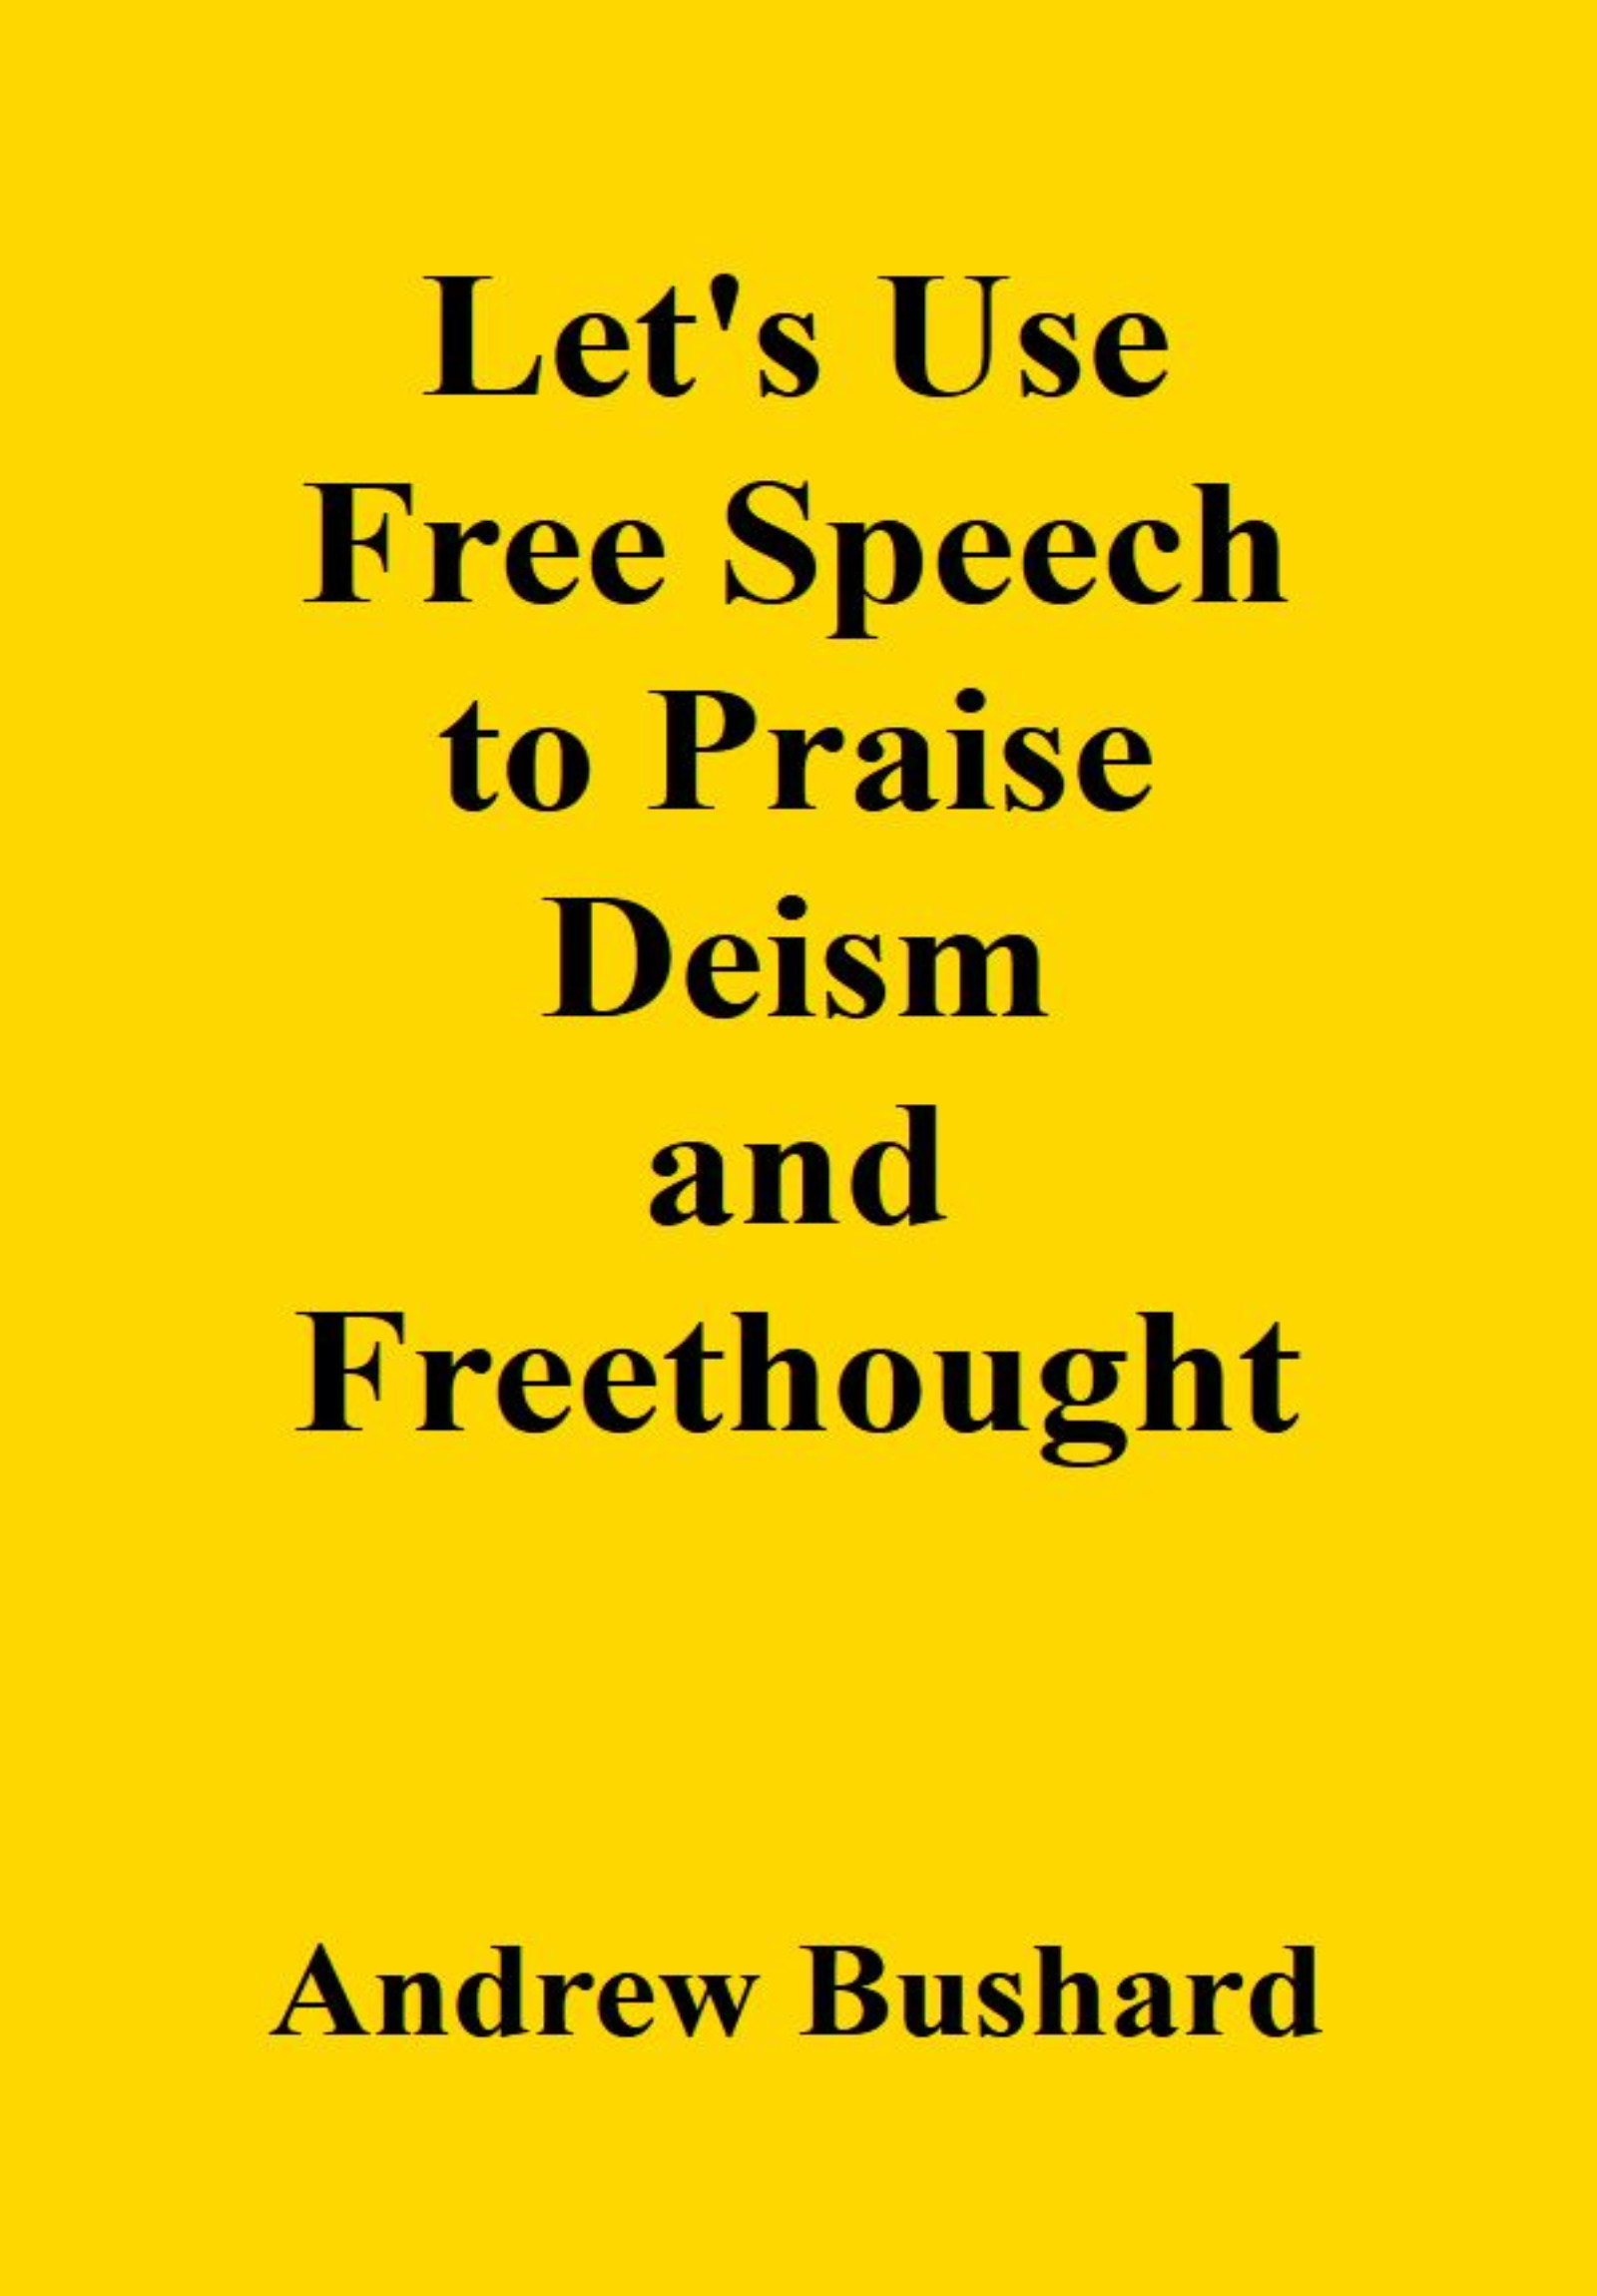 Let's Use Free Speech to Praise Deism and Freethought's featured image